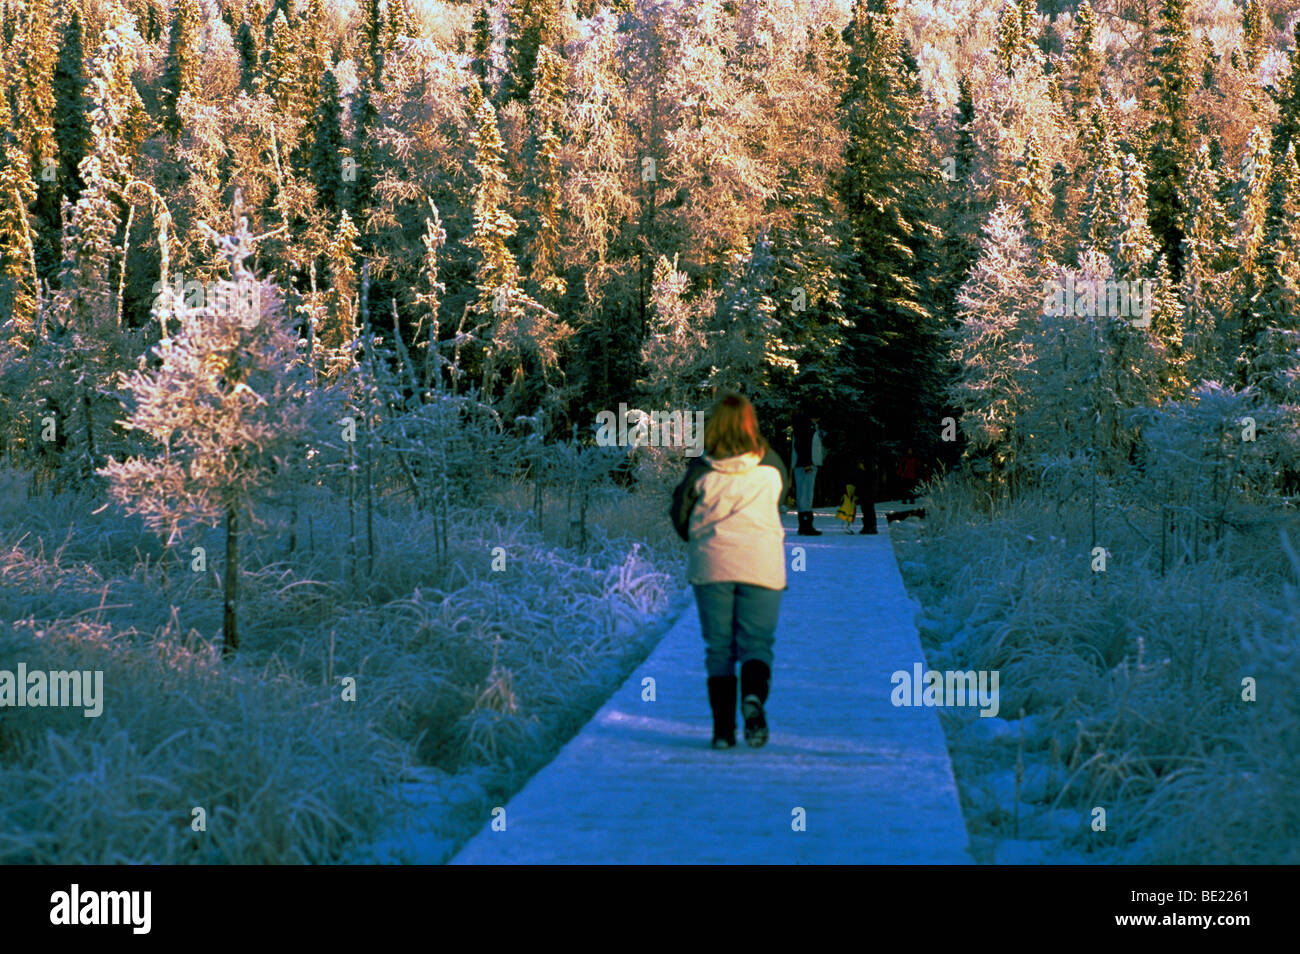 Liard River Hot Springs Provincial Park, Northern BC, British Columbia, Canada, Woman walking on Boardwalk to Hot Spring, Winter Stock Photo